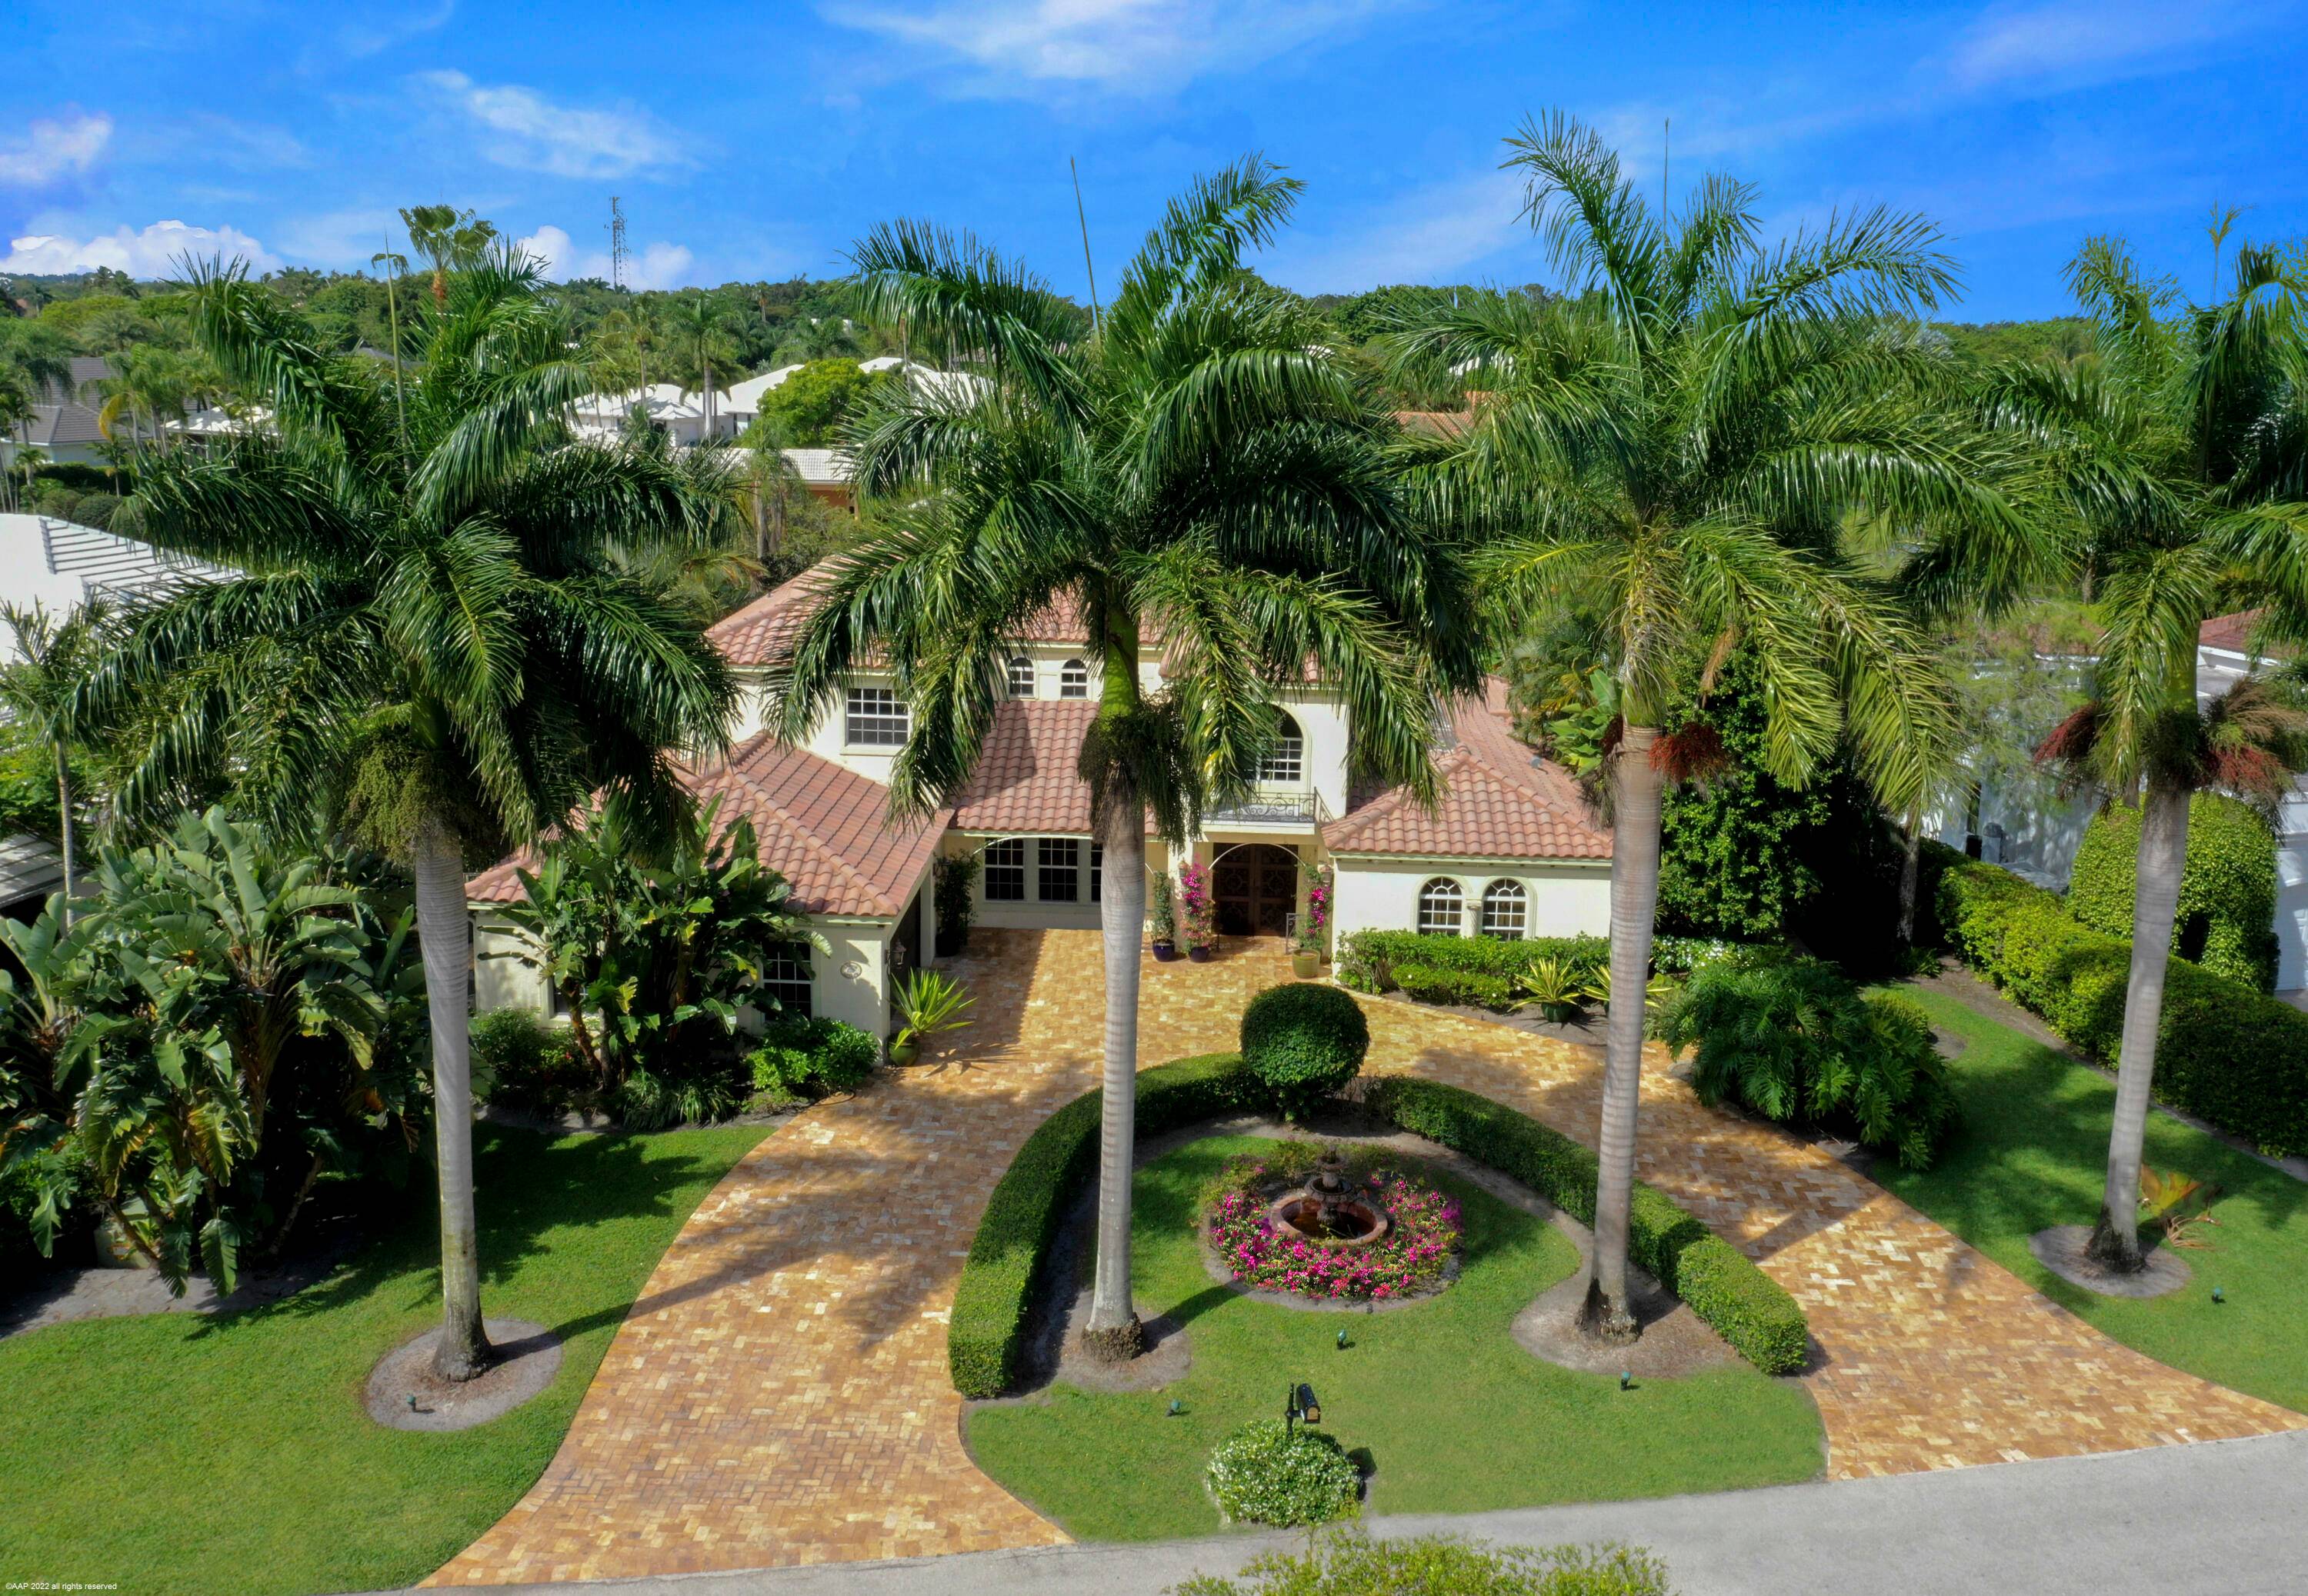 Spend the season in this south facing, Mediterranean estate home, located in one of the most sought after areas of the Palm Beach Polo Club.